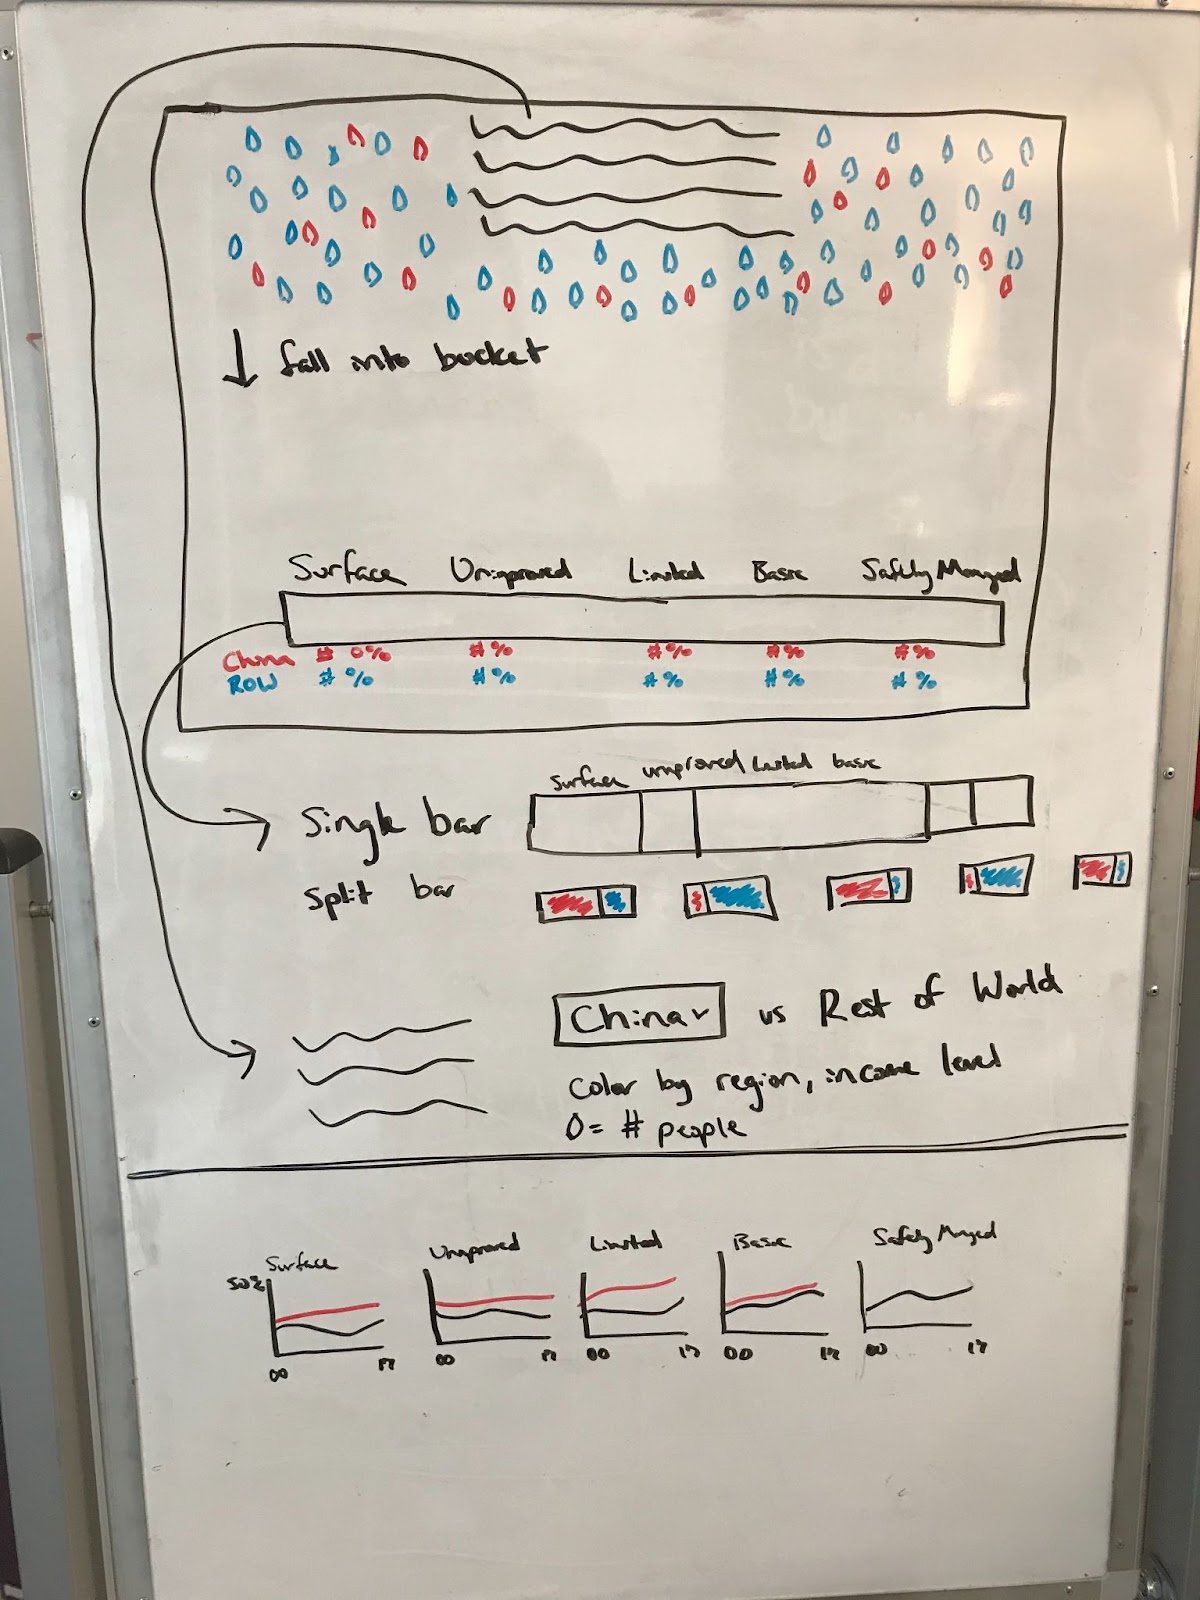 whiteboard sketch of water droplets falling into a bucket, with a variety of supporting charts below